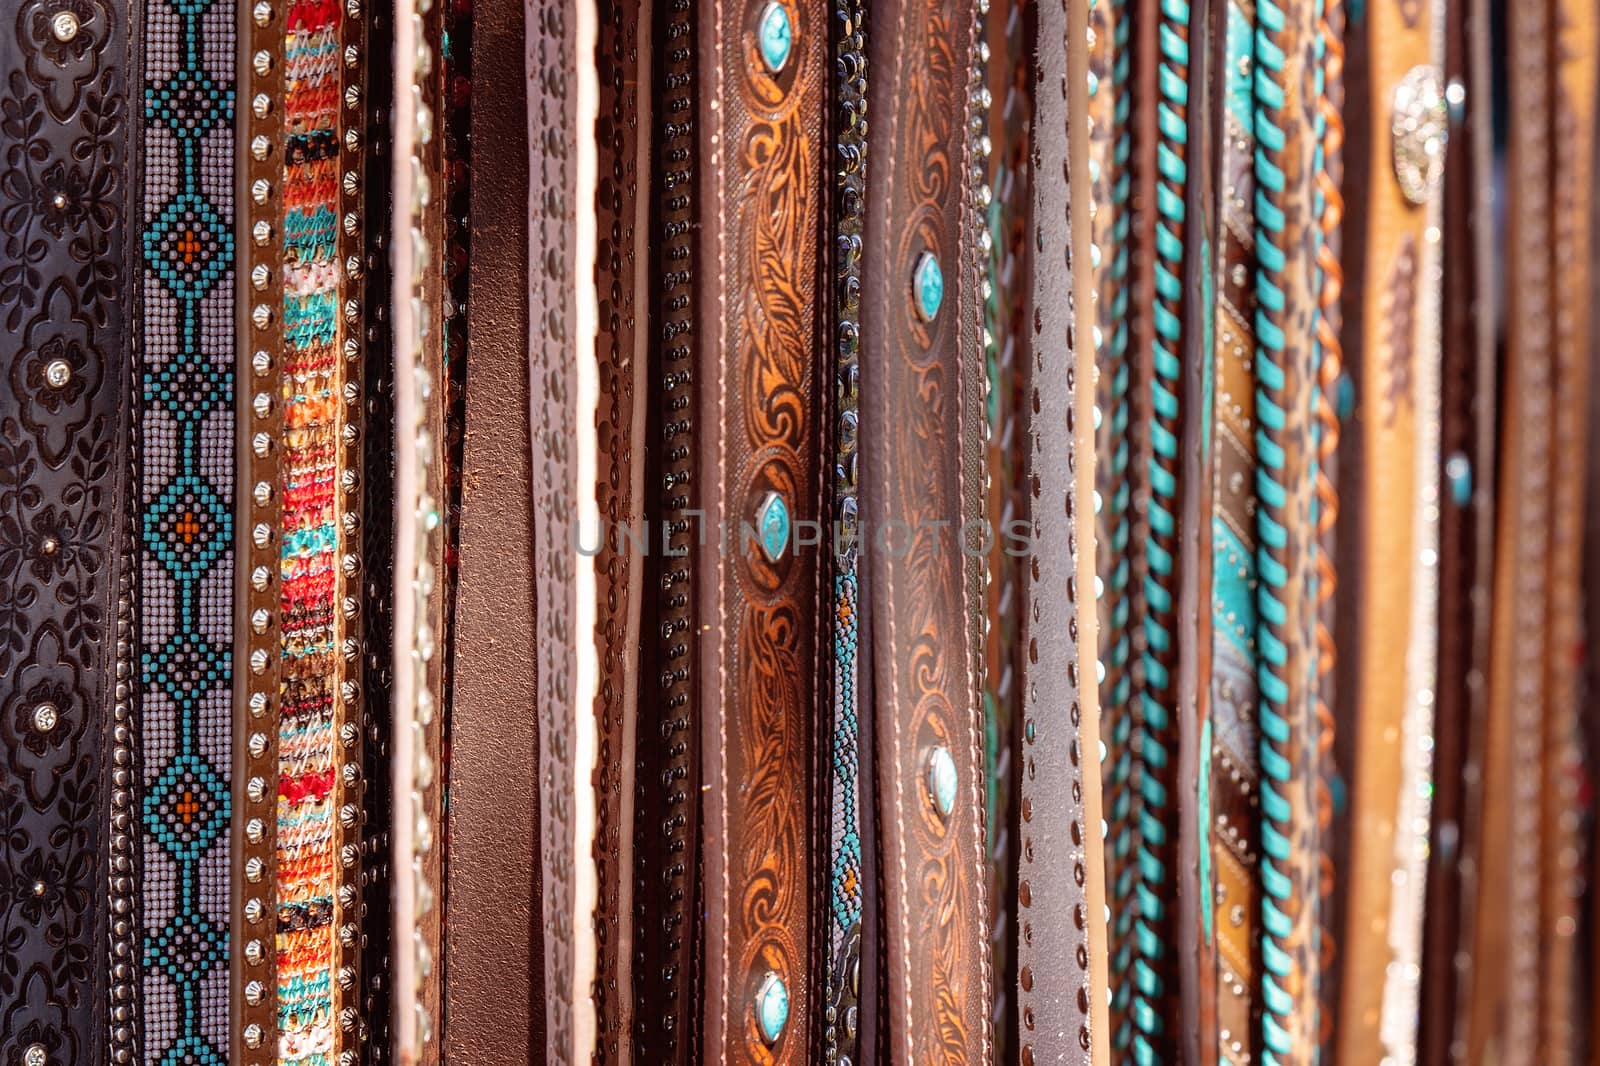 A group of women's country style leather belts for sale at a market stall